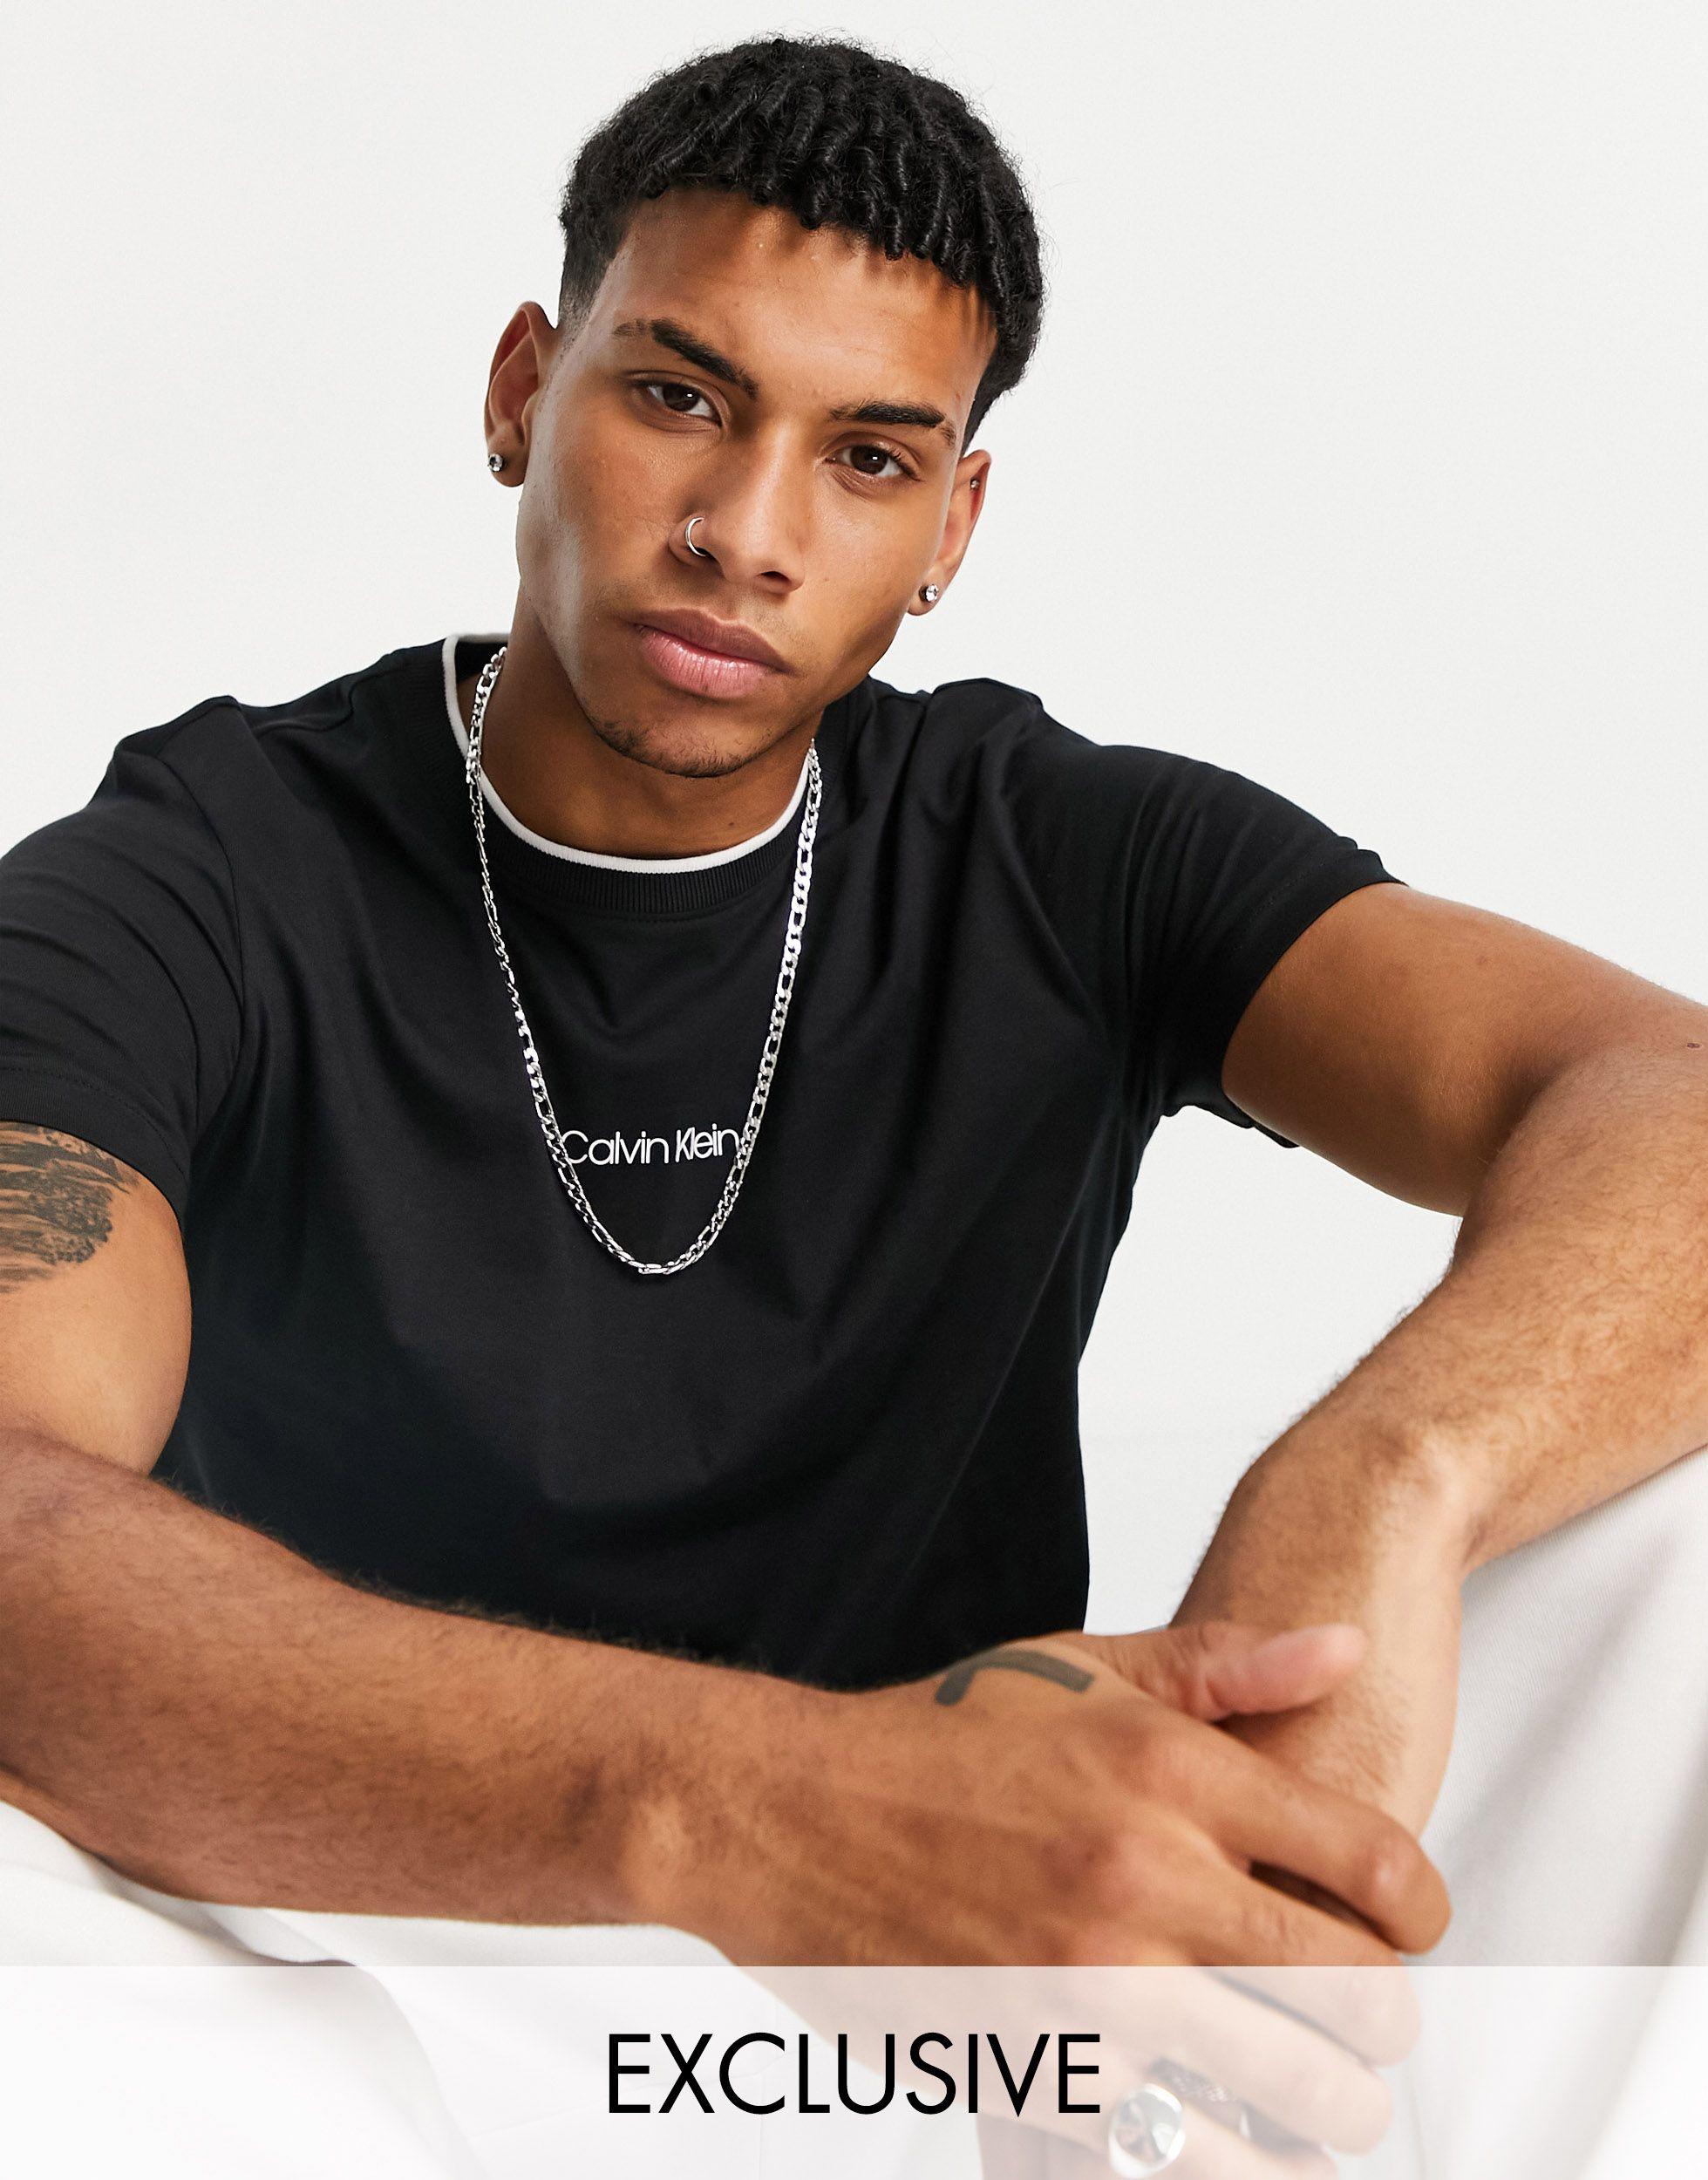 Calvin Klein Central Online Clearance, 70% OFF | careers.ibrainers.uk